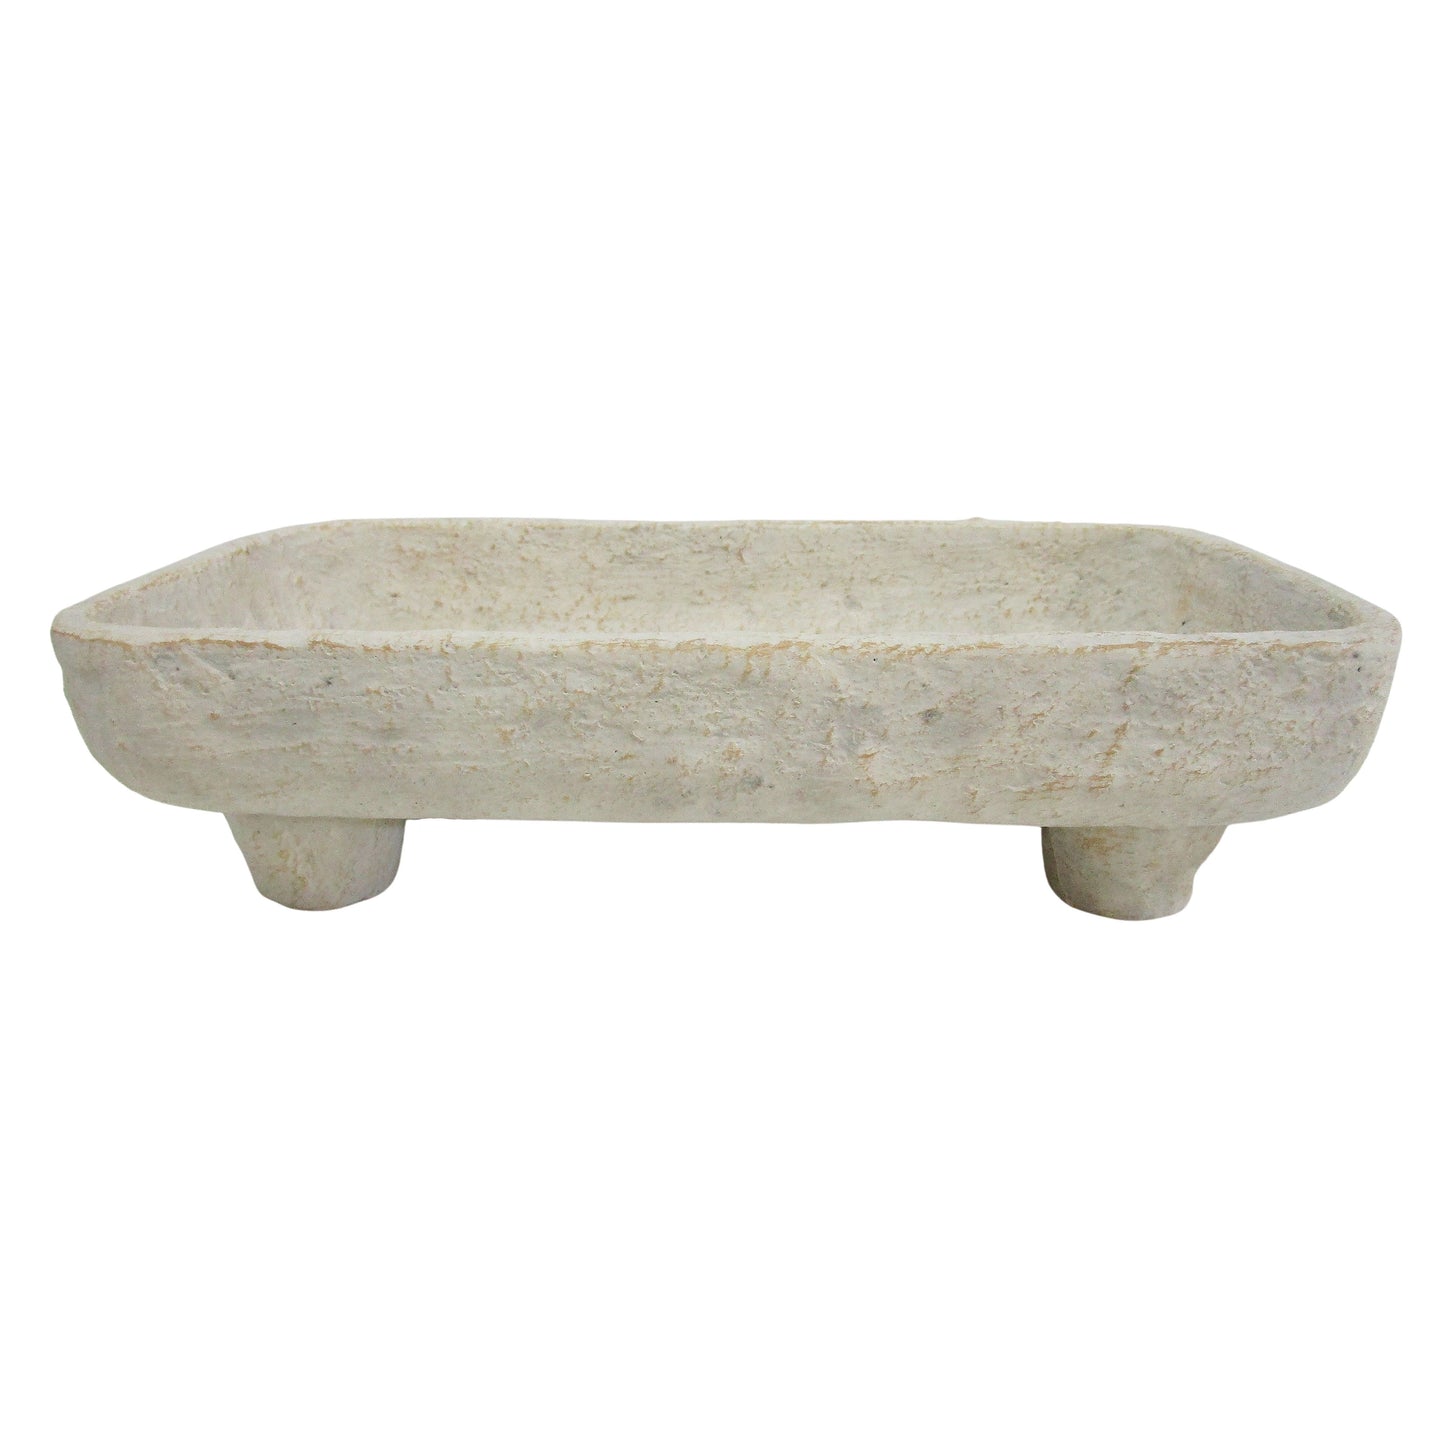 Textured Footed Tray - 36X21X10CM